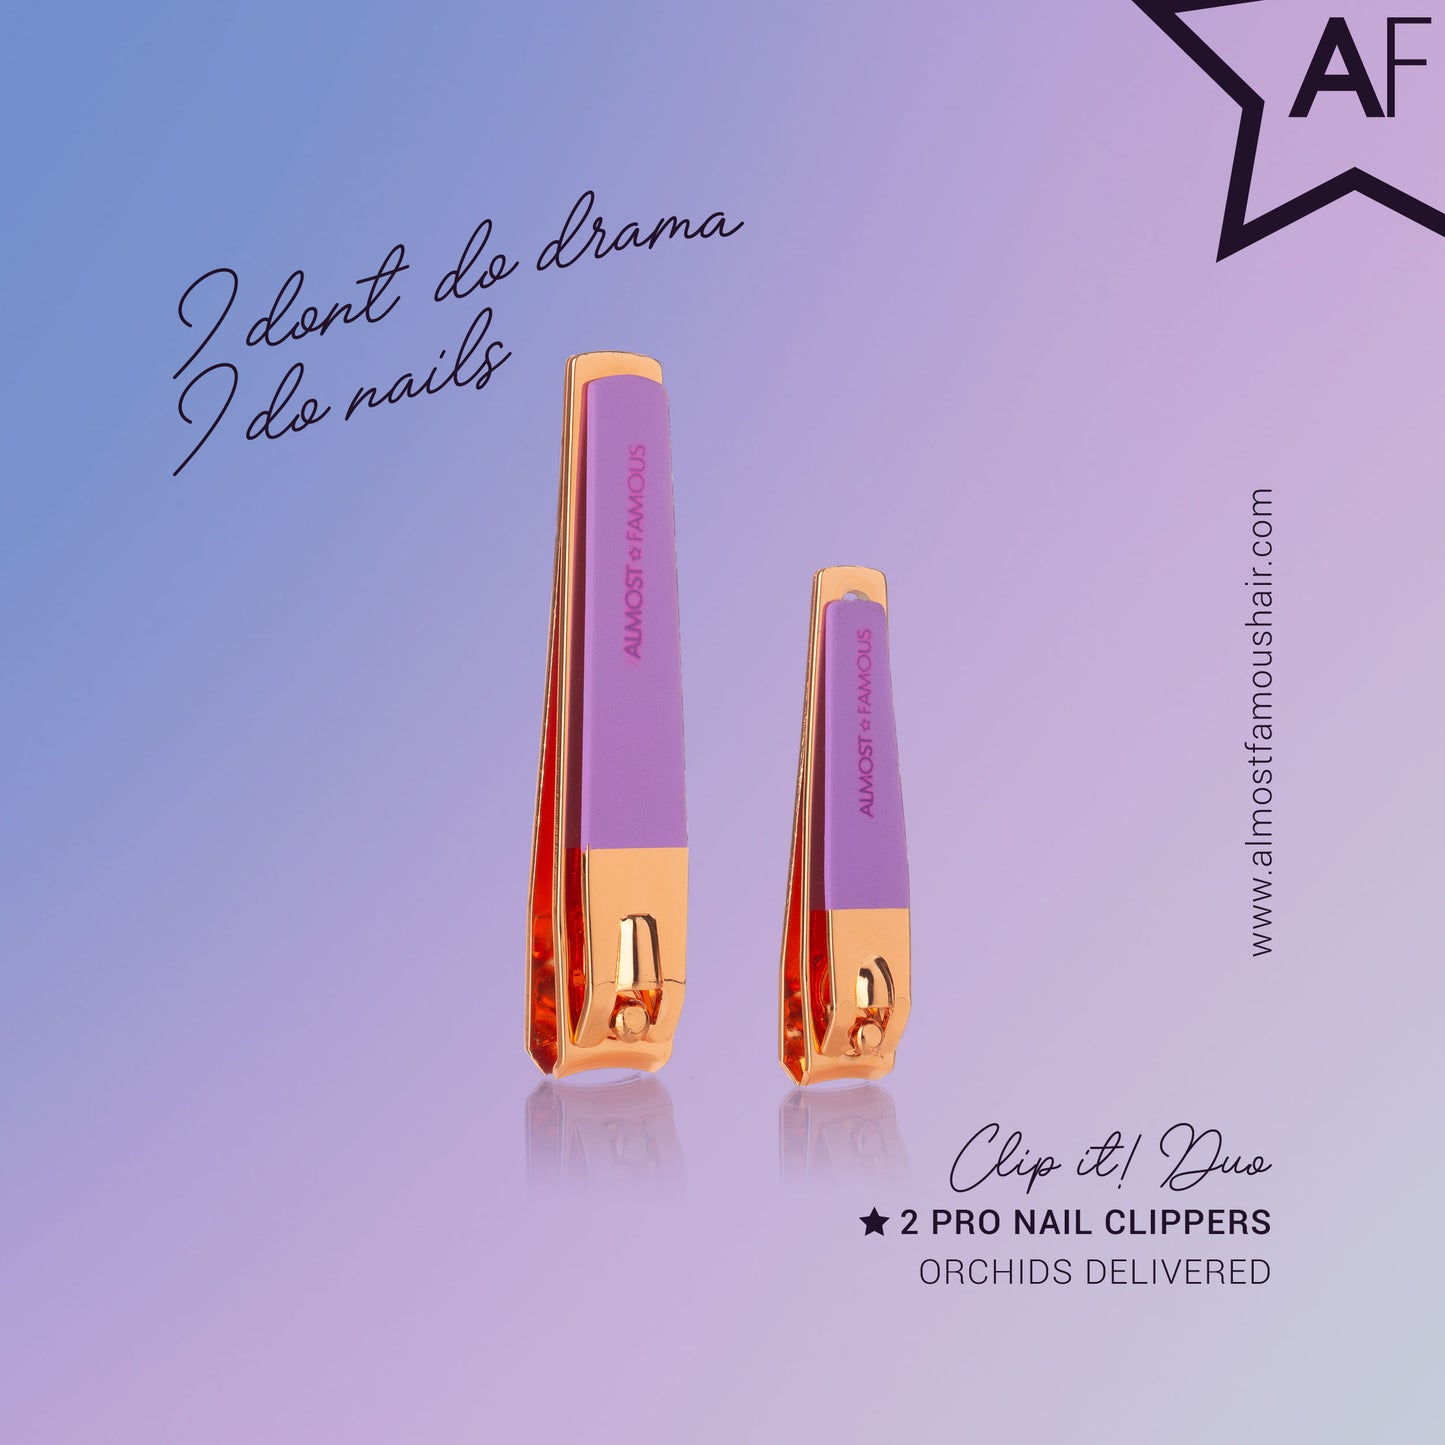 Almost Famous "Clip It" Rose Gold Nail Clipper Duo